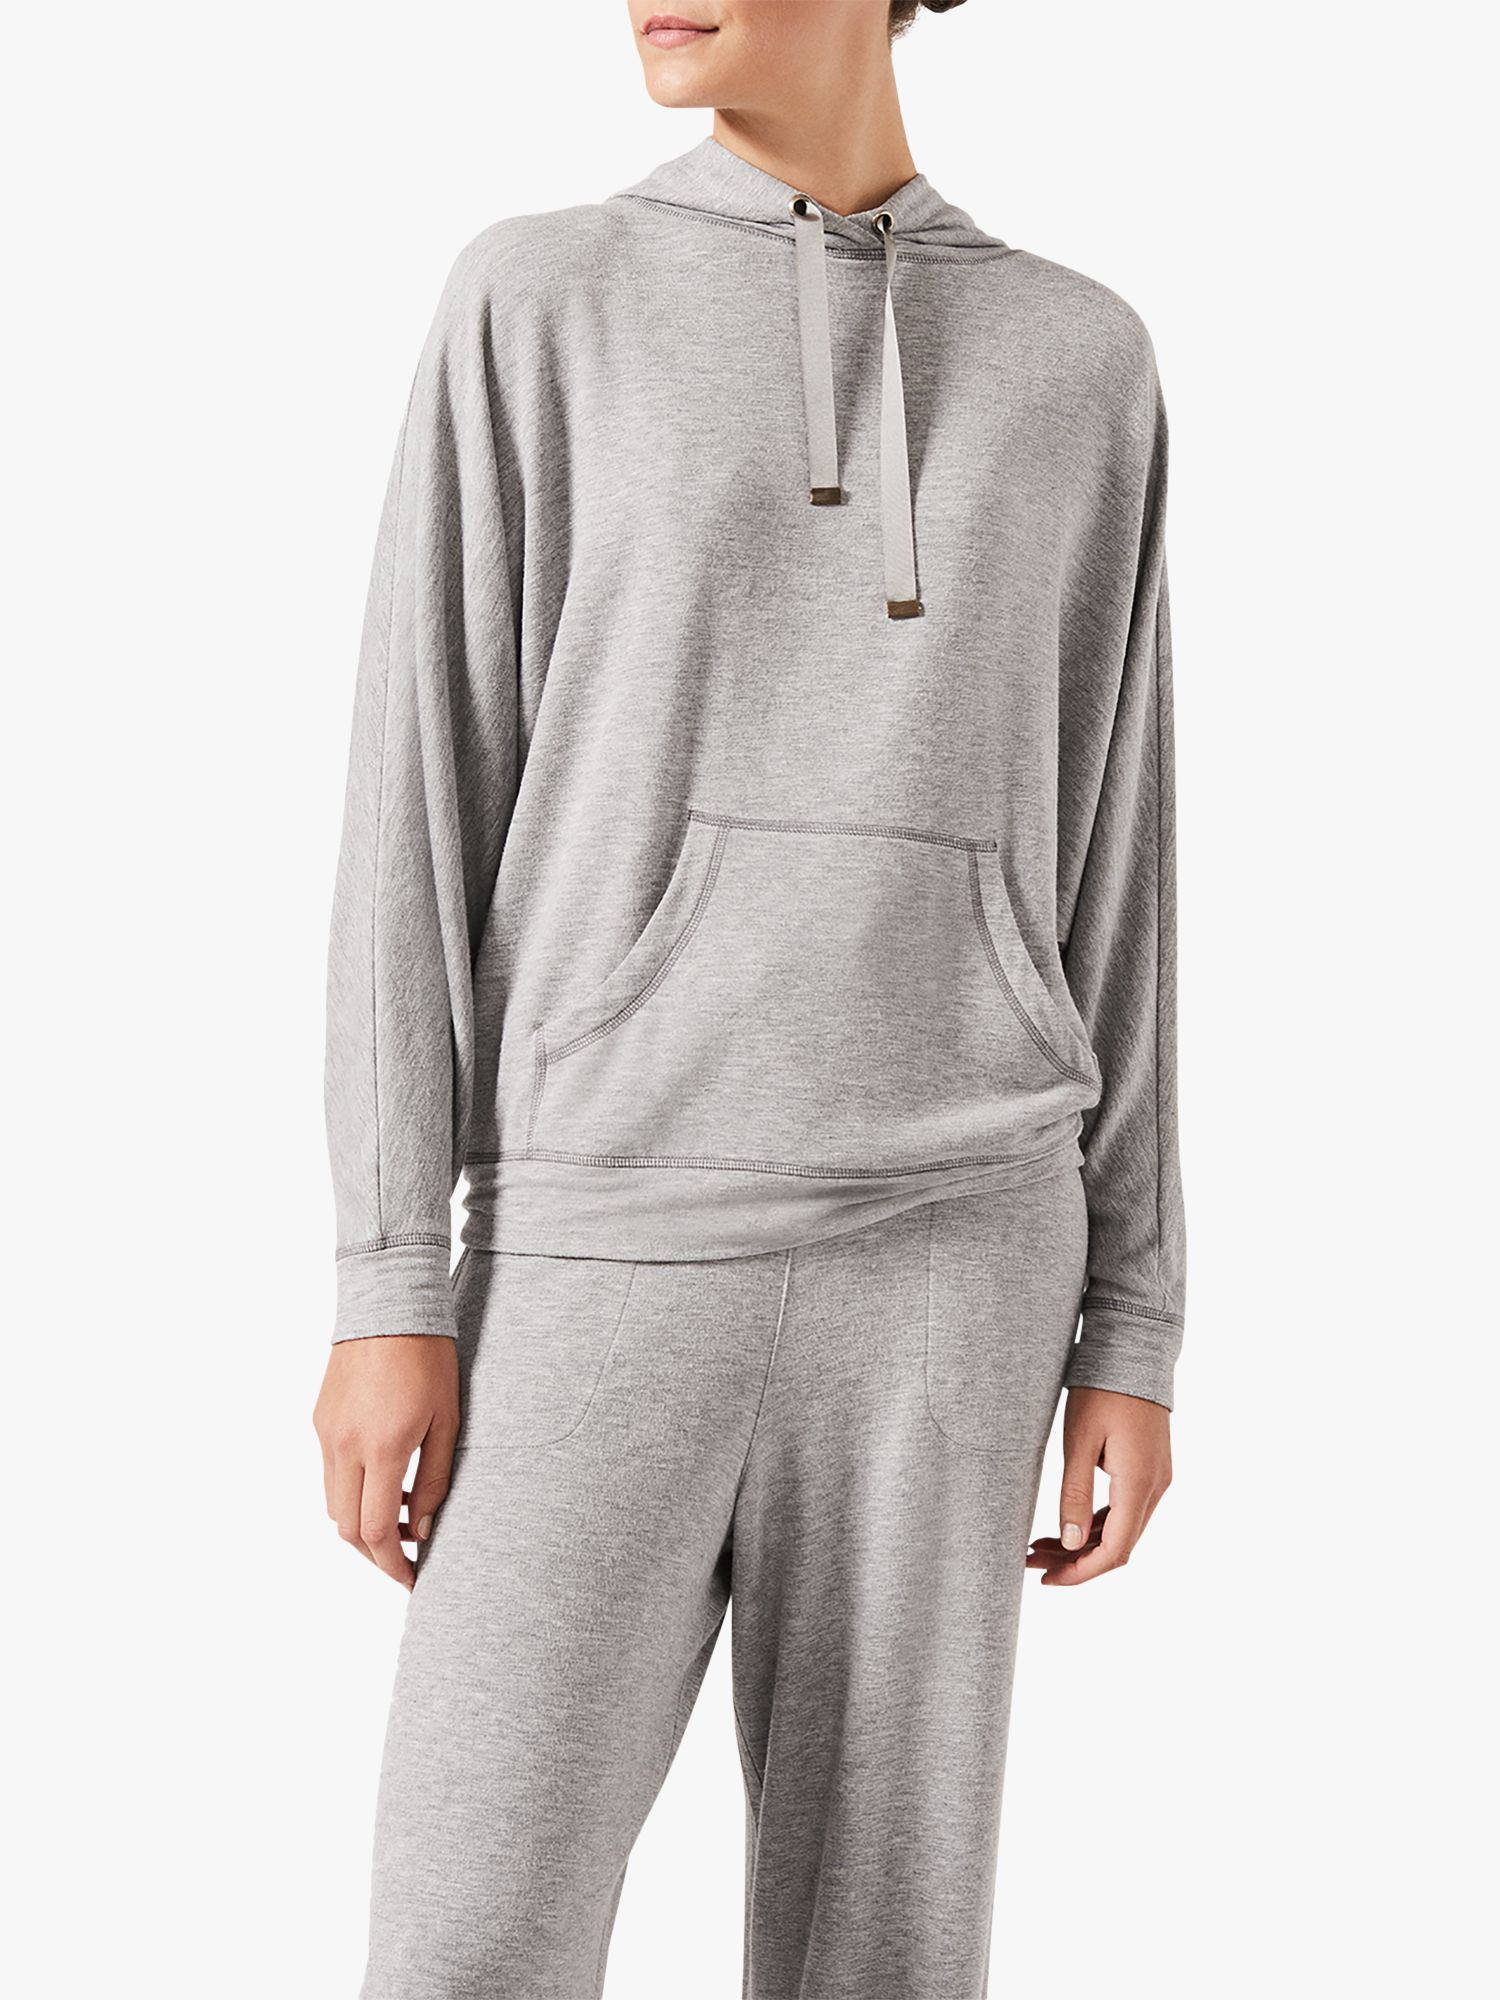 Phase Eight Hooded Sweat Top, Grey Marl